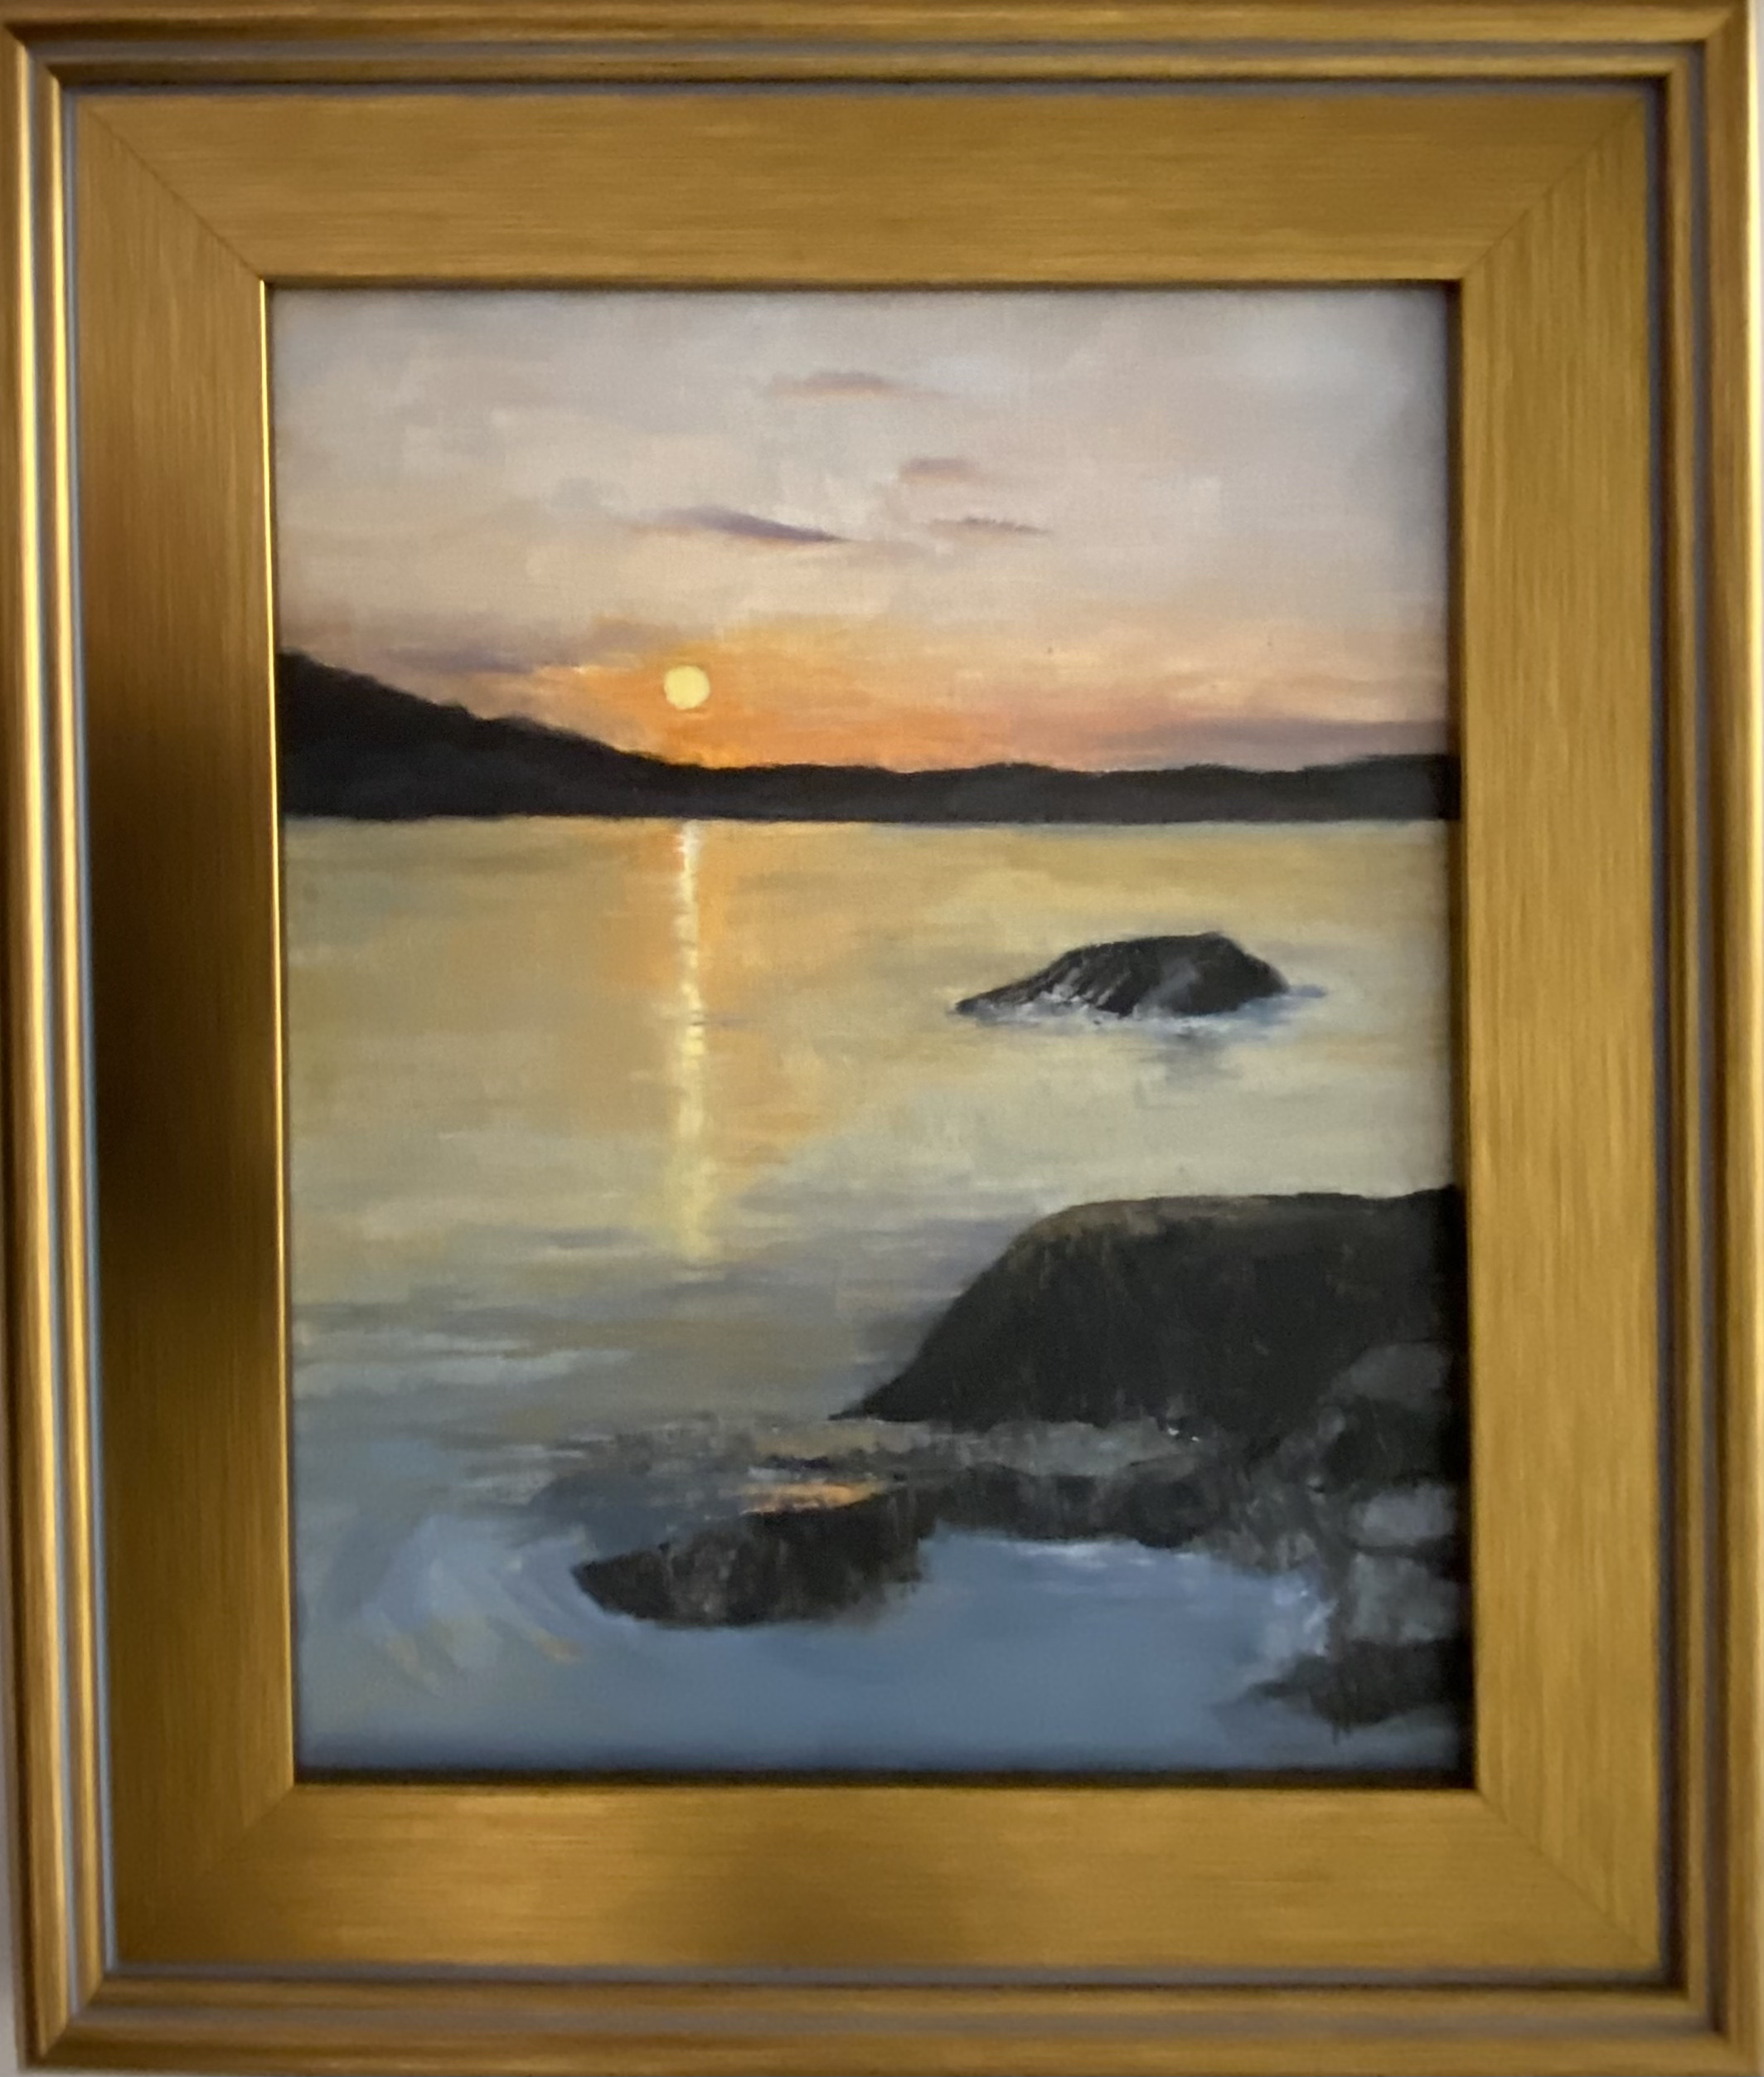 The tranquil Sunset On Lake Monroe is beautifully rendered in Henry Leck's reflective landscape painting.